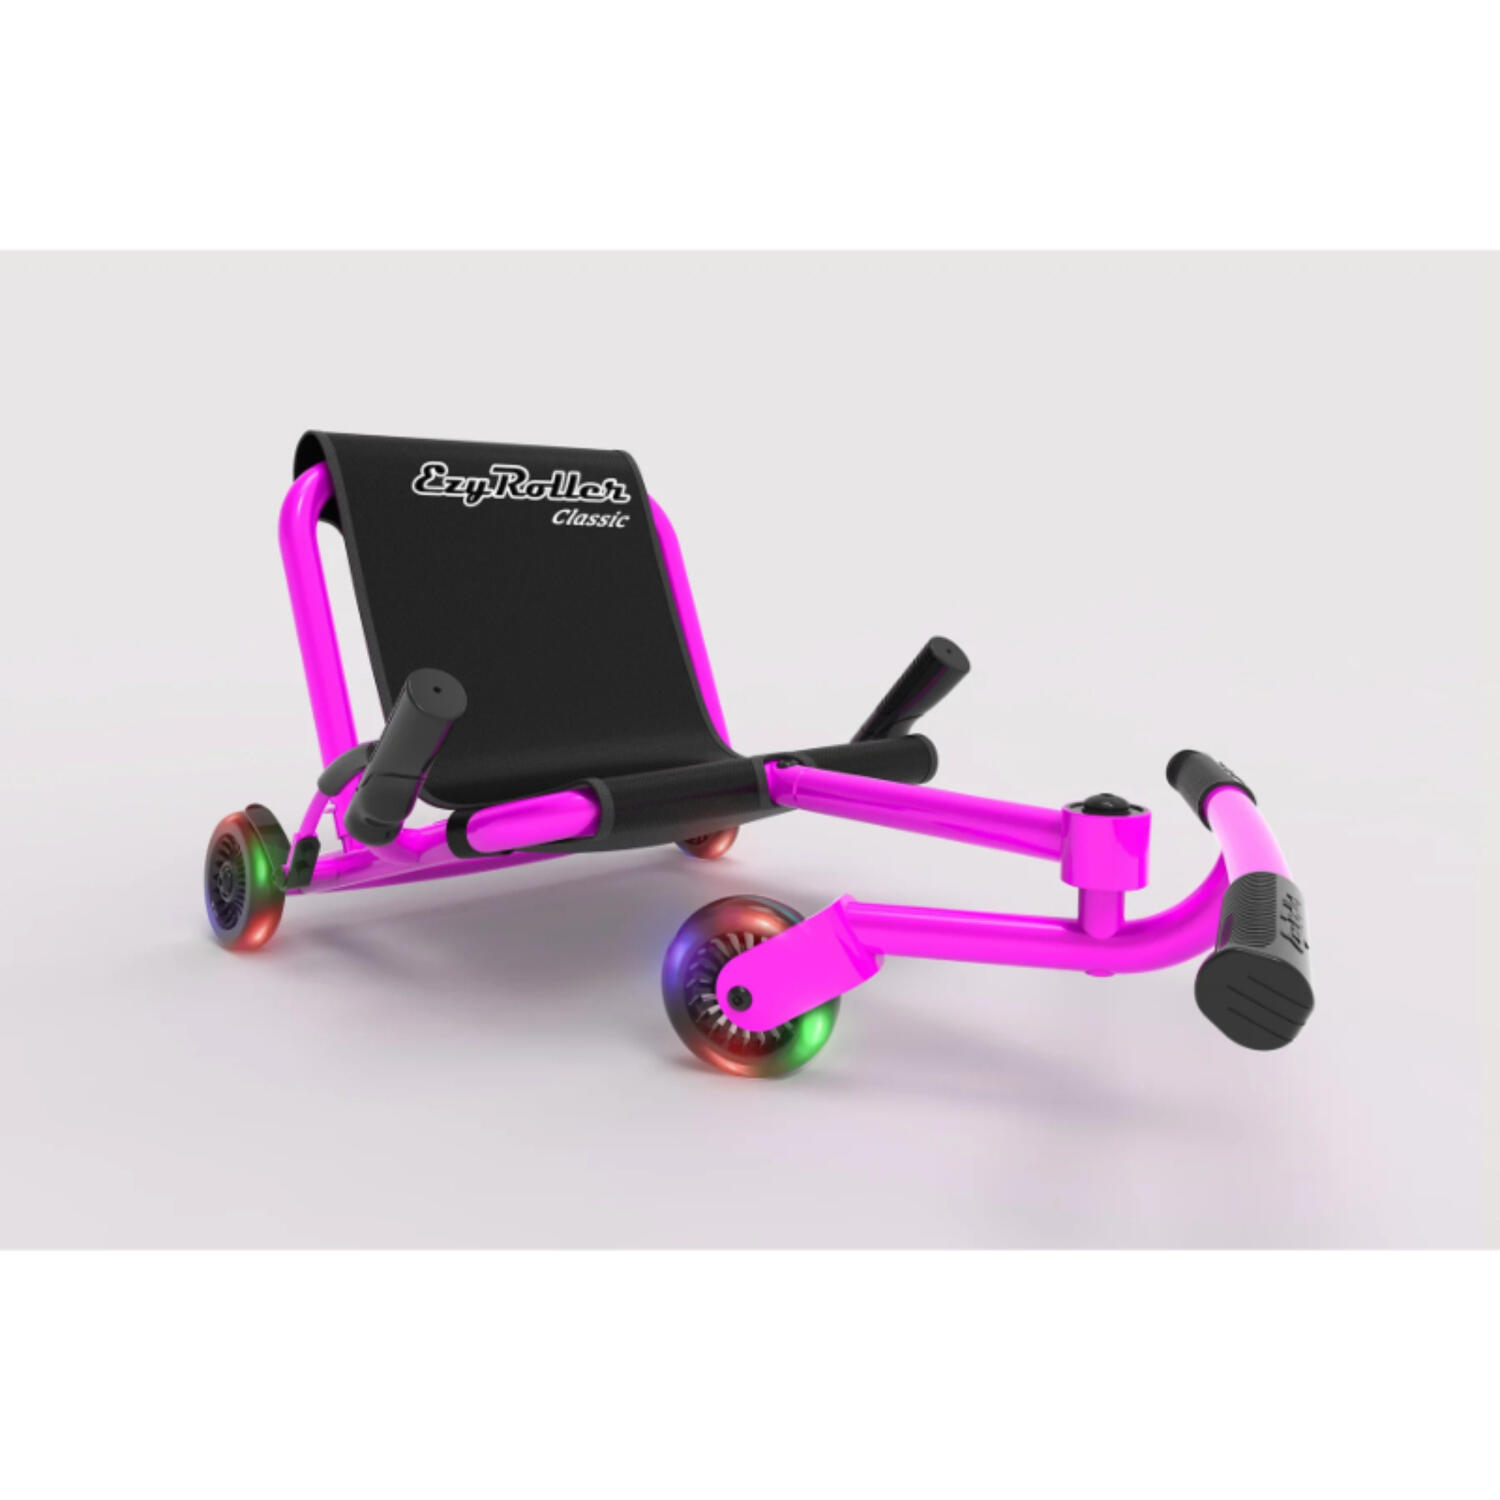 EzyRoller Classic Ride-On Kart with LED Wheels - Pink 1/3